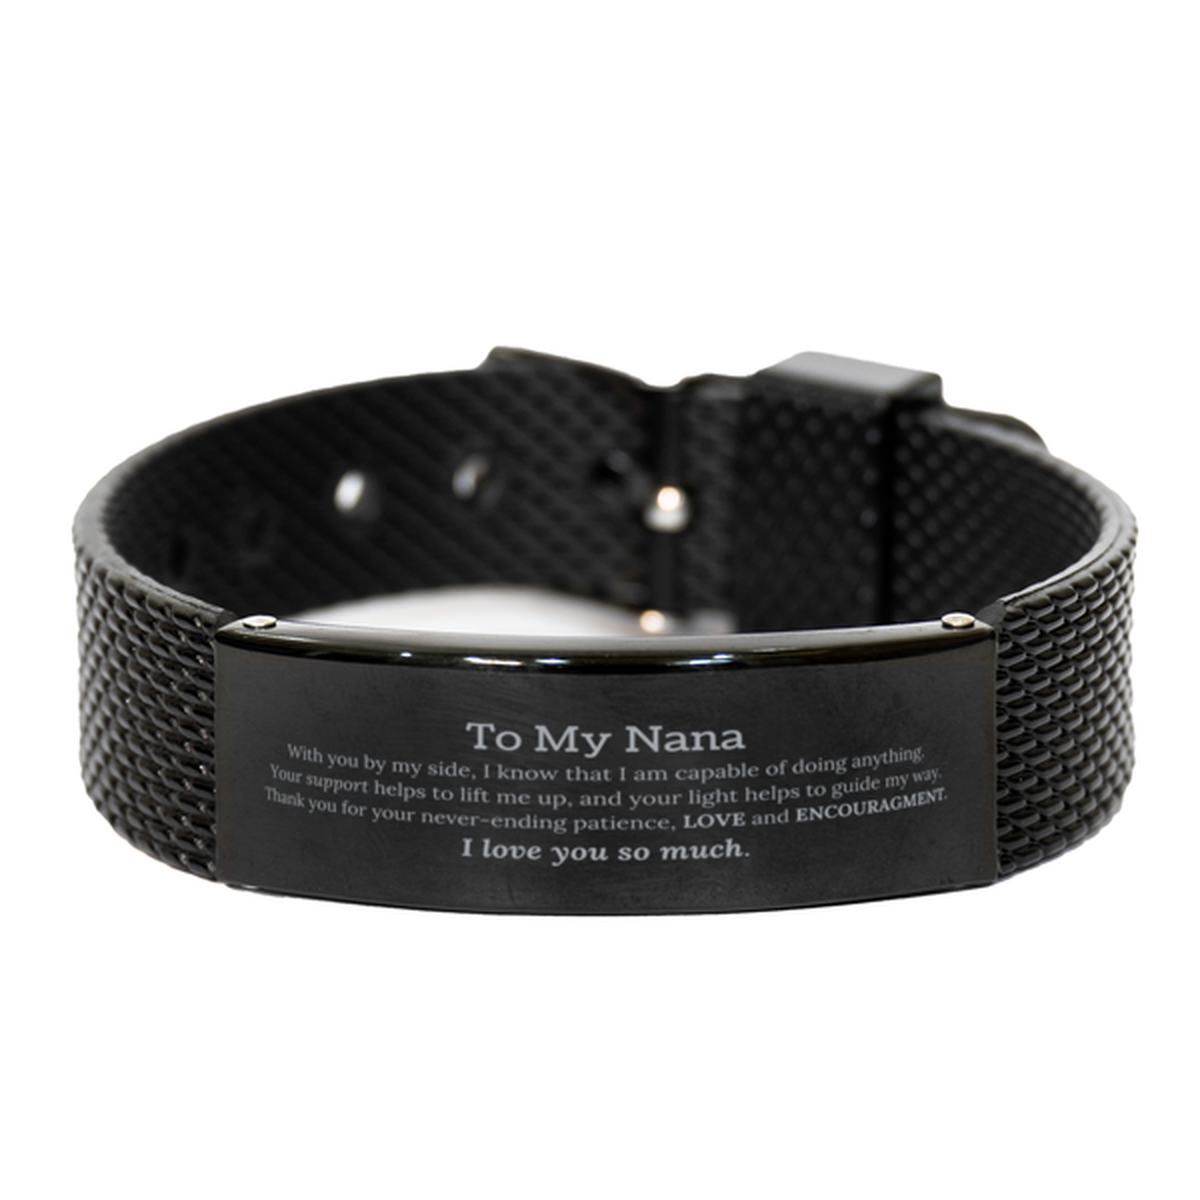 Appreciation Nana Black Shark Mesh Bracelet Gifts, To My Nana Birthday Christmas Wedding Keepsake Gifts for Nana With you by my side, I know that I am capable of doing anything. I love you so much